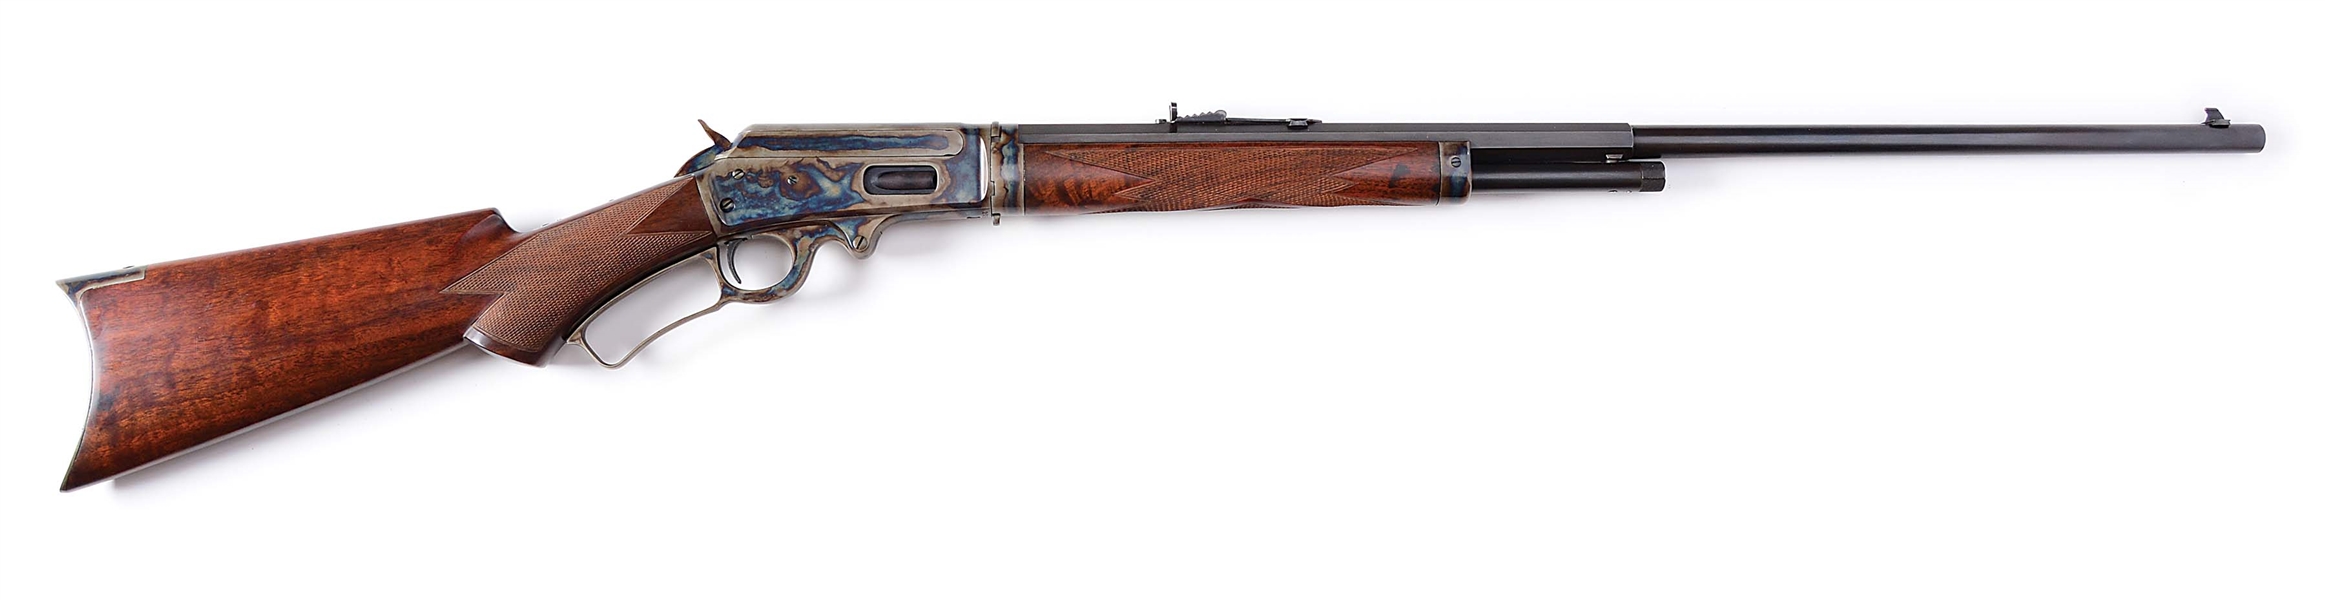 (C) CASE COLORED MARLIN 1893 TAKEDOWN LEVER ACTION RIFLE (1900).